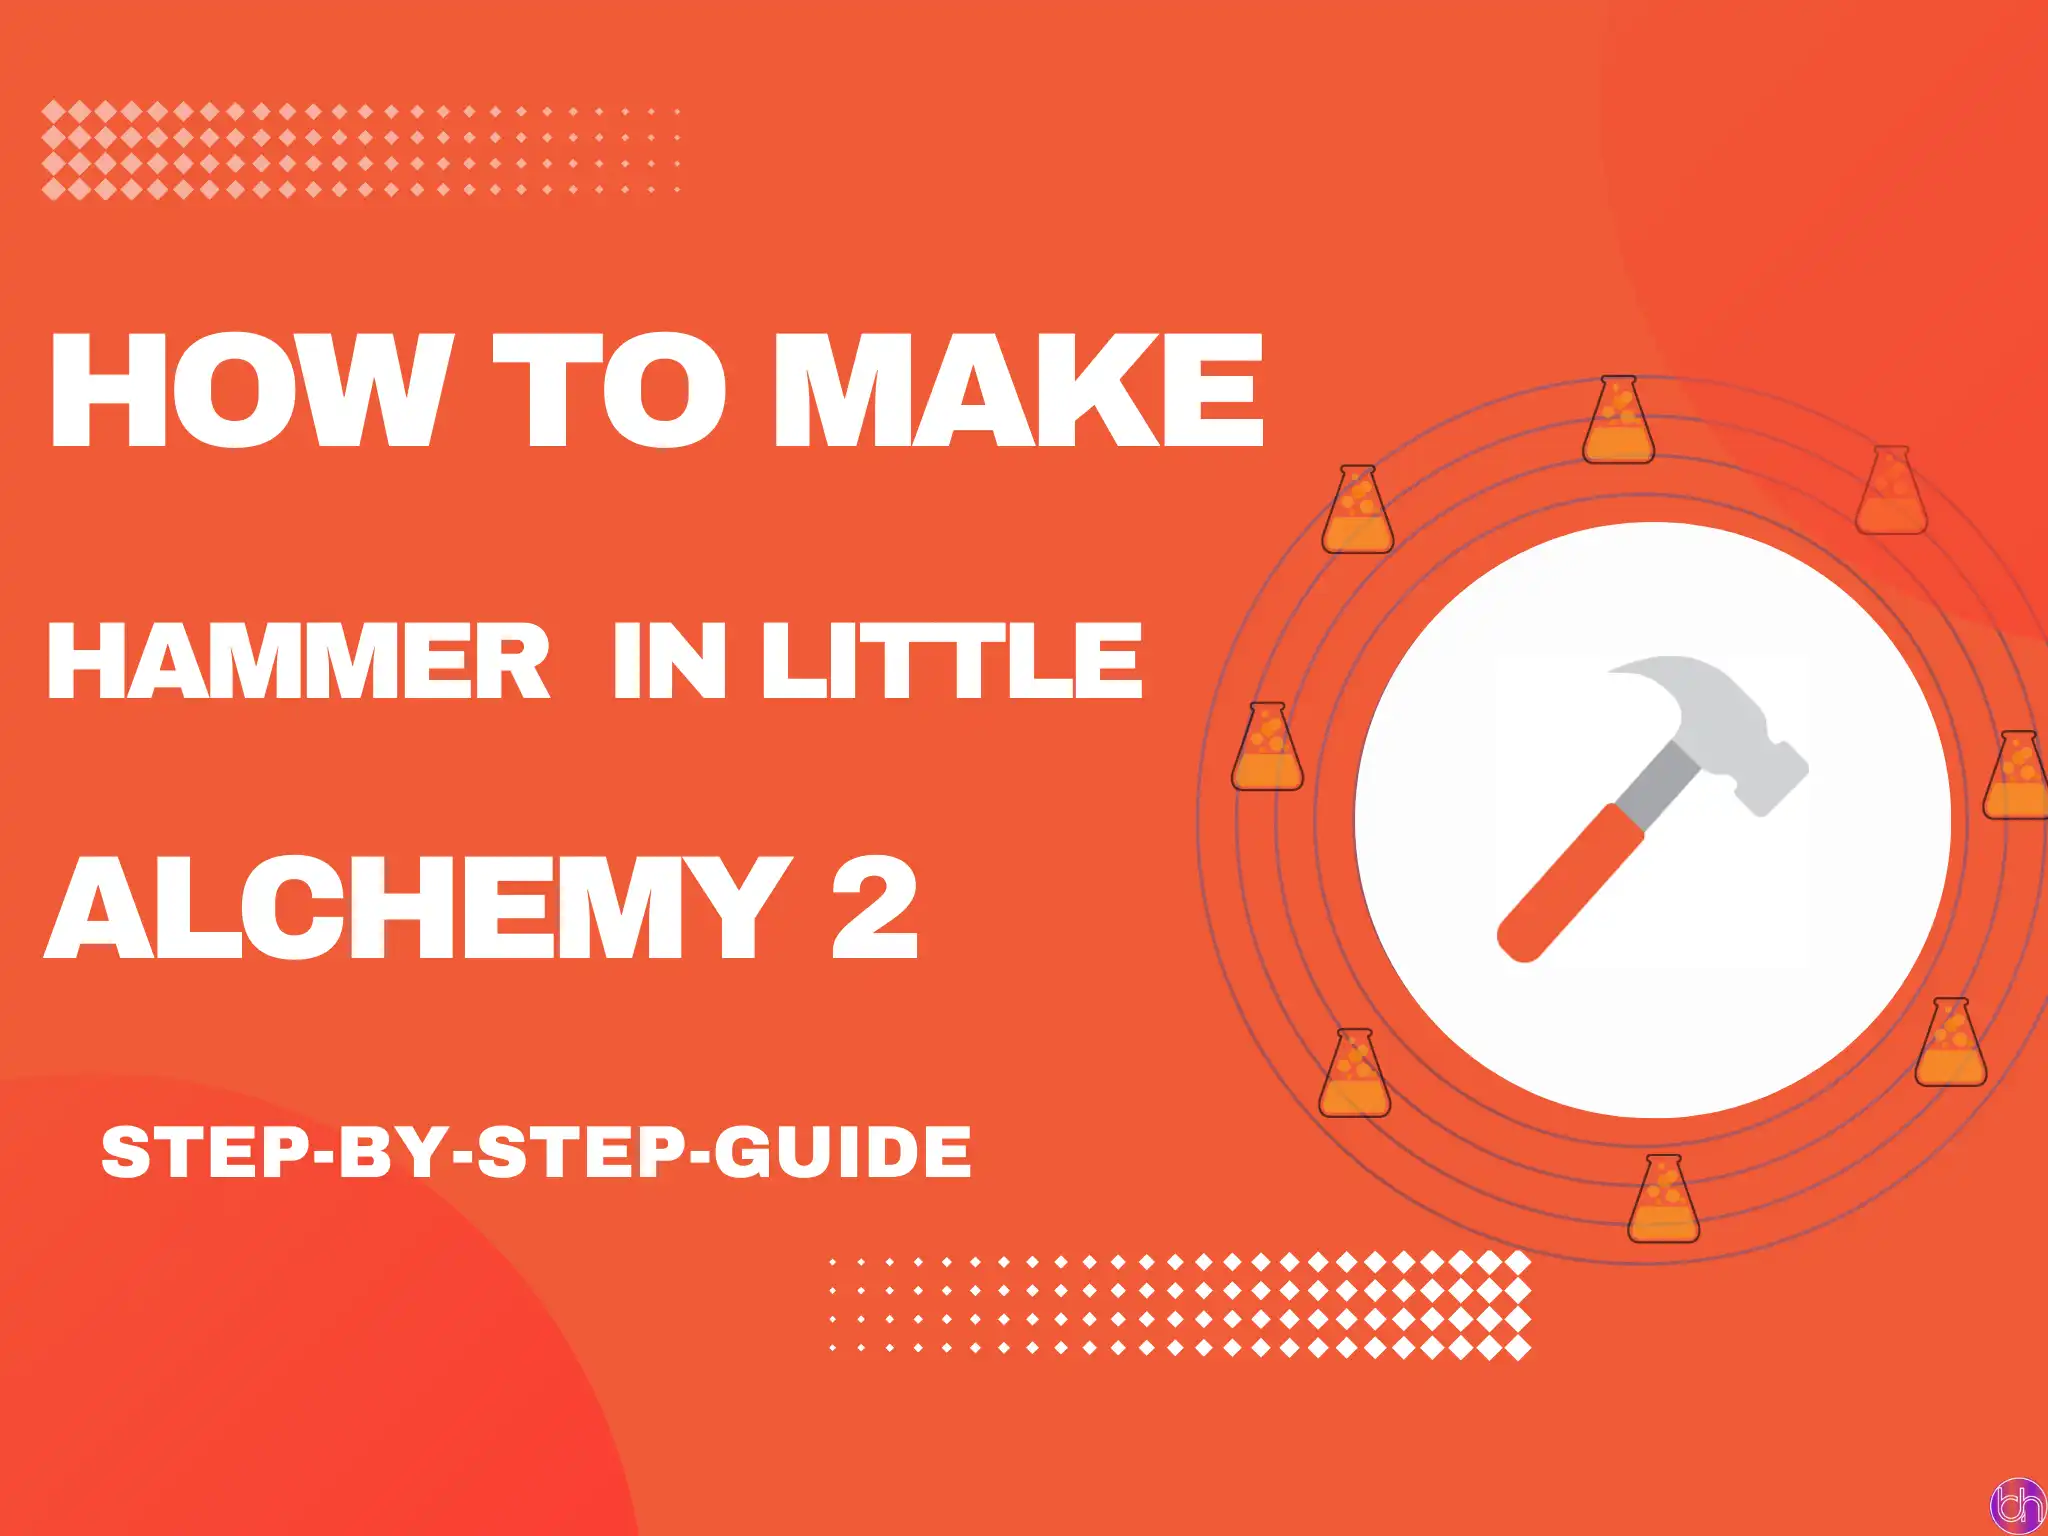 How to make Hammer in Little Alchemy 2